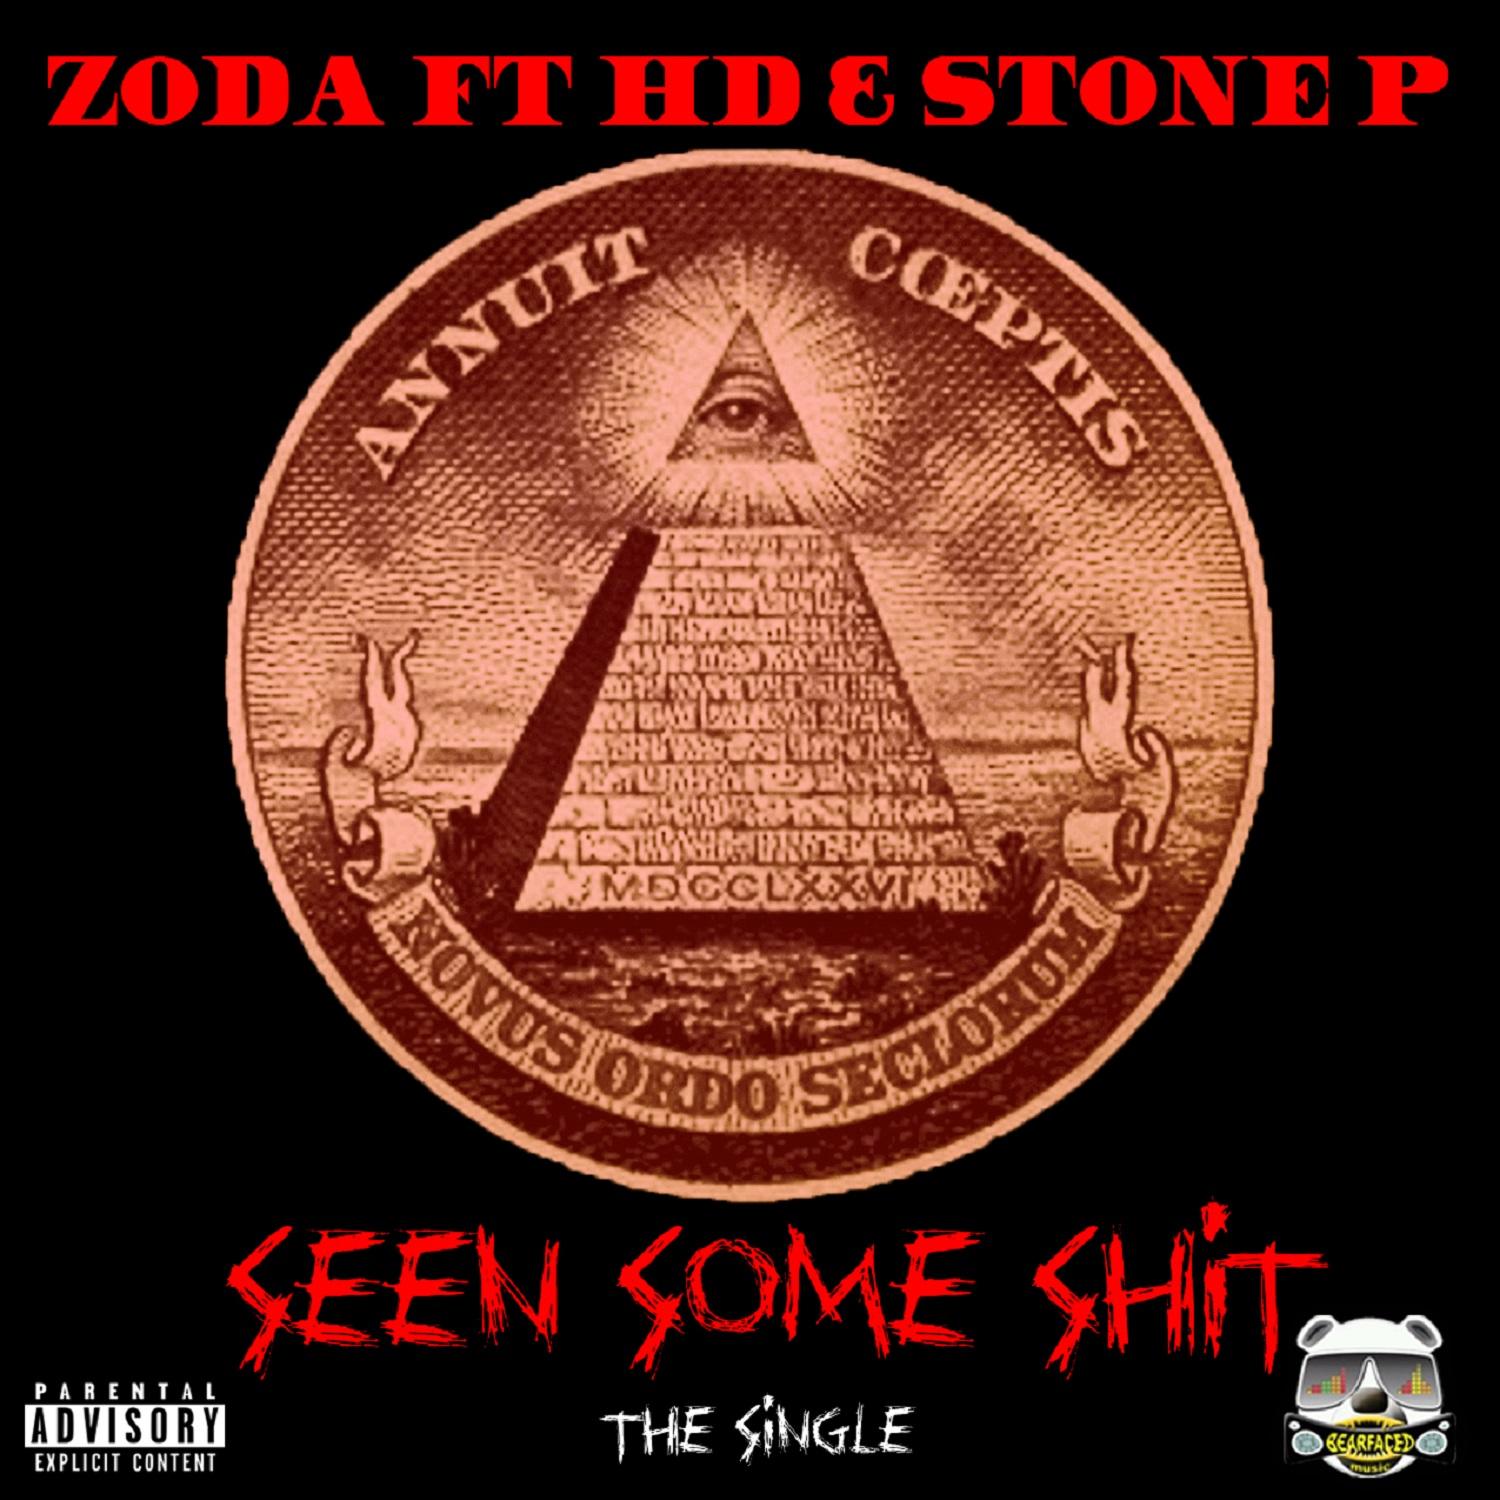 Seen Some **** (feat. Hd & Stone P)